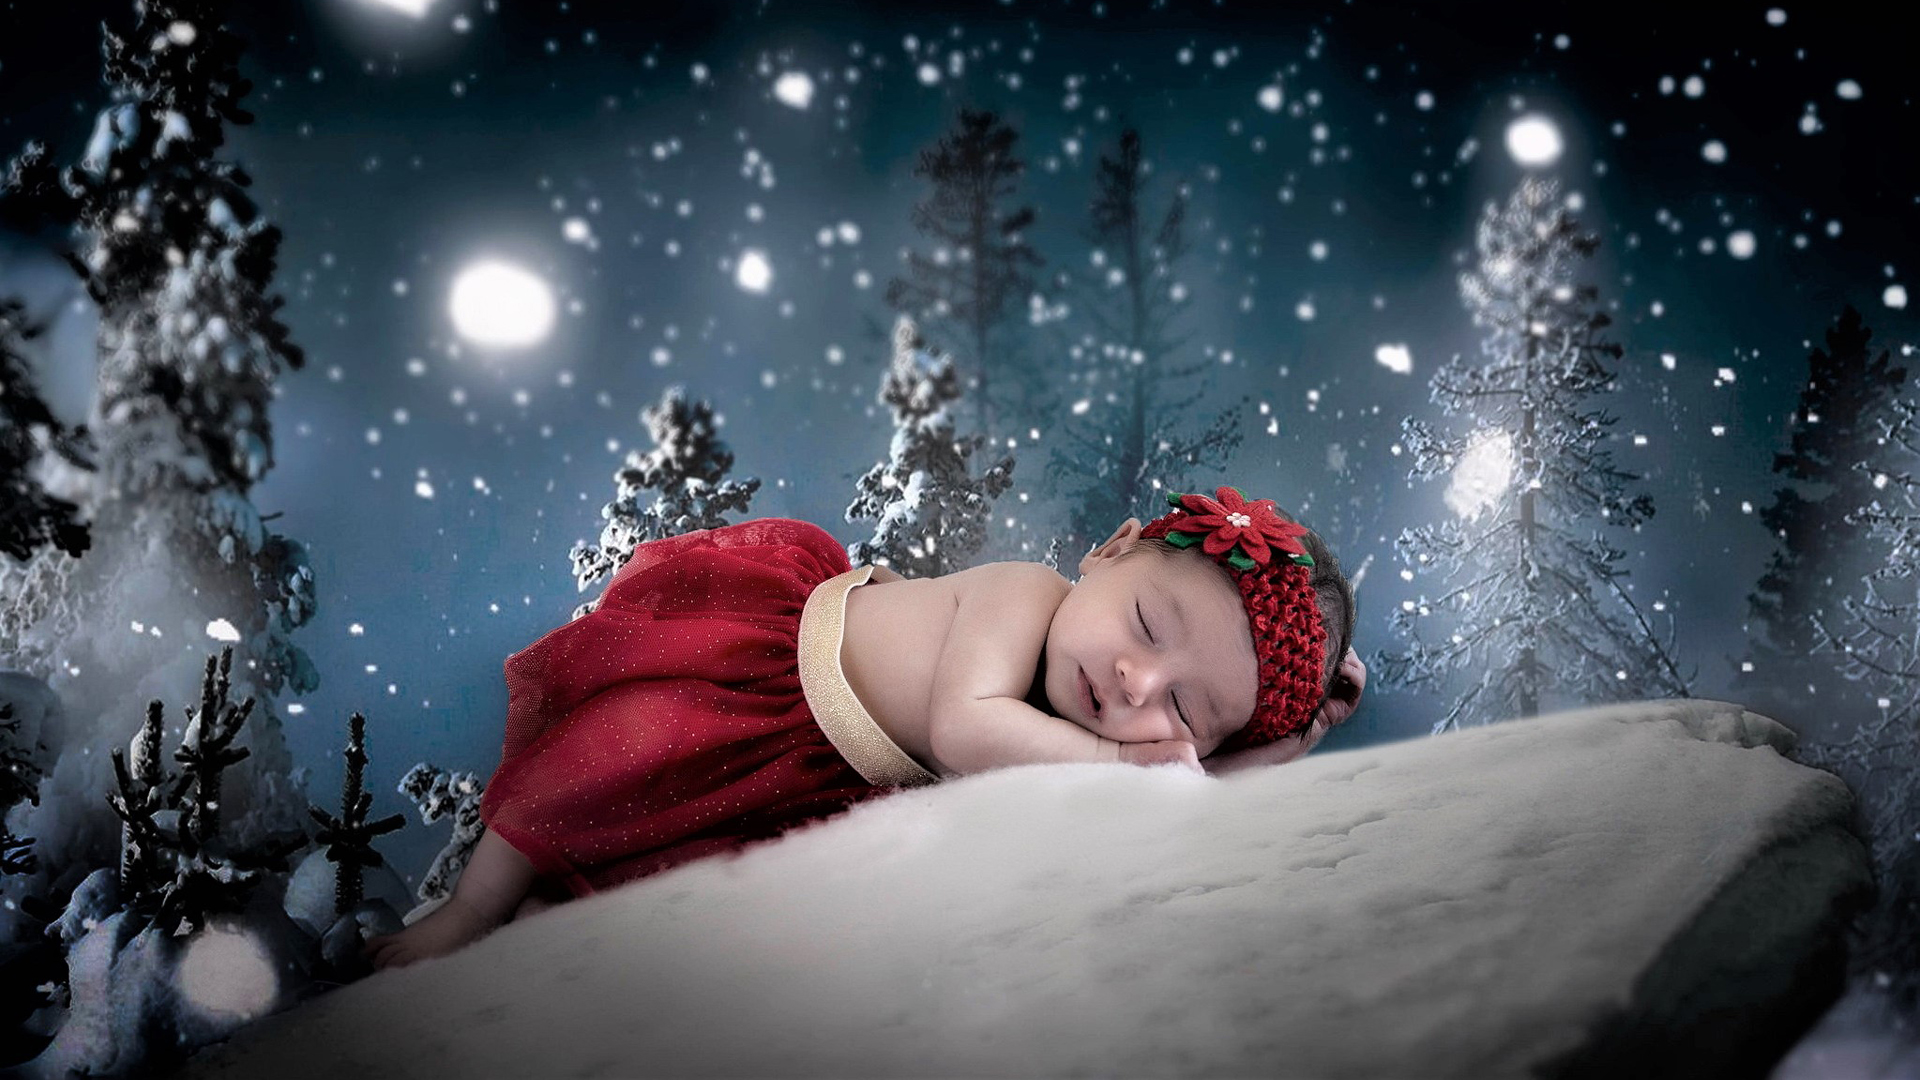 Baby girl is sleeping on snow covered rock with starry Wallpaper wearing red dress and band on head hd